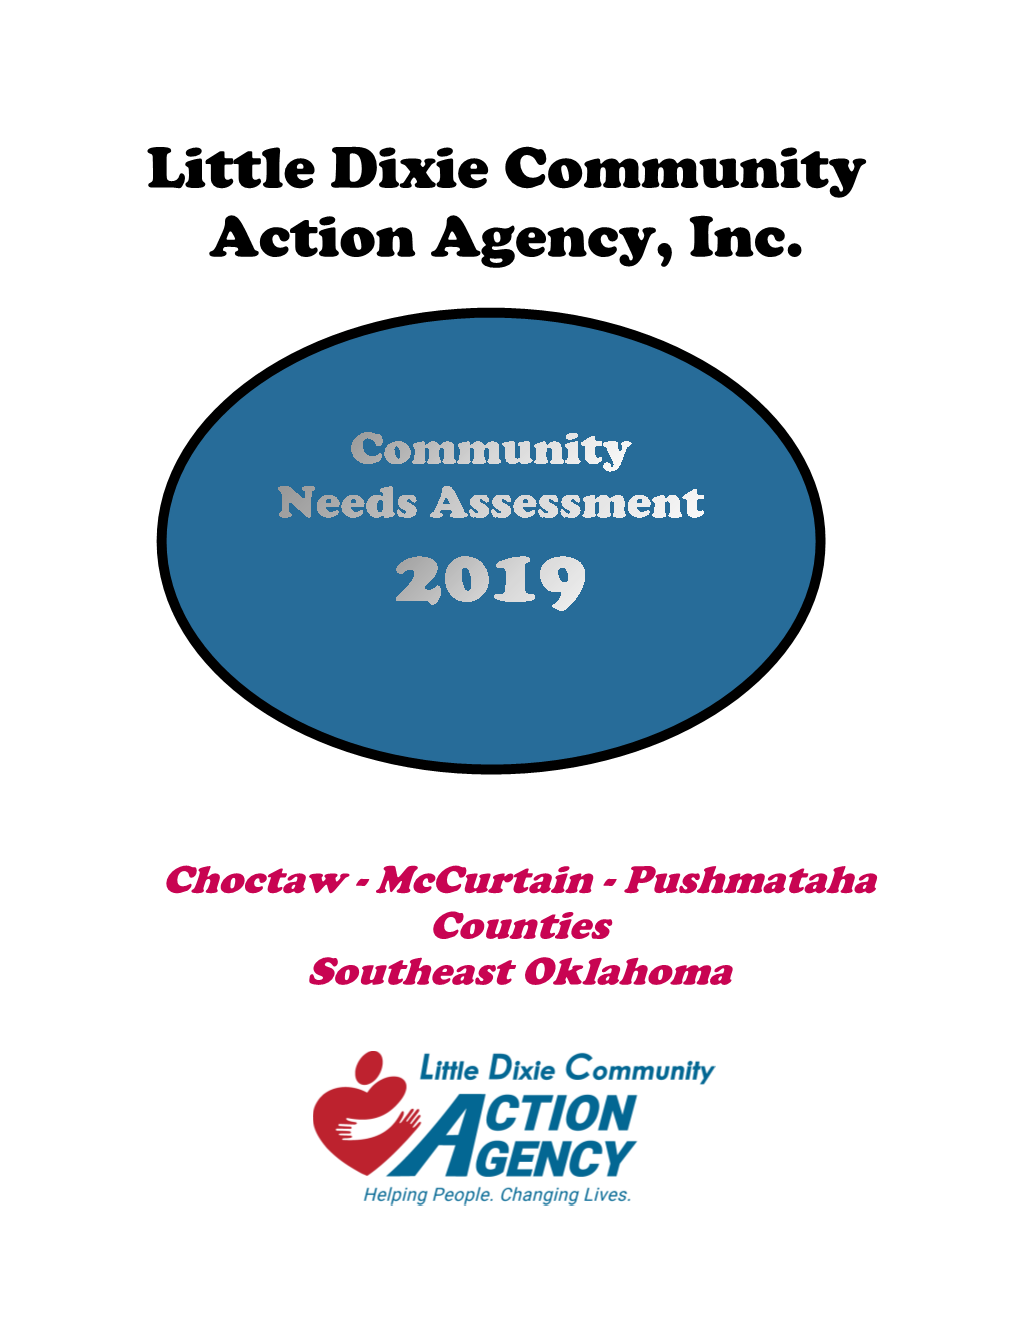 Community Needs Assessment: the Purpose of a Community Needs Assessment Is to Identify and Prioritize the Needs and Resources of a Defined Community Or Communities